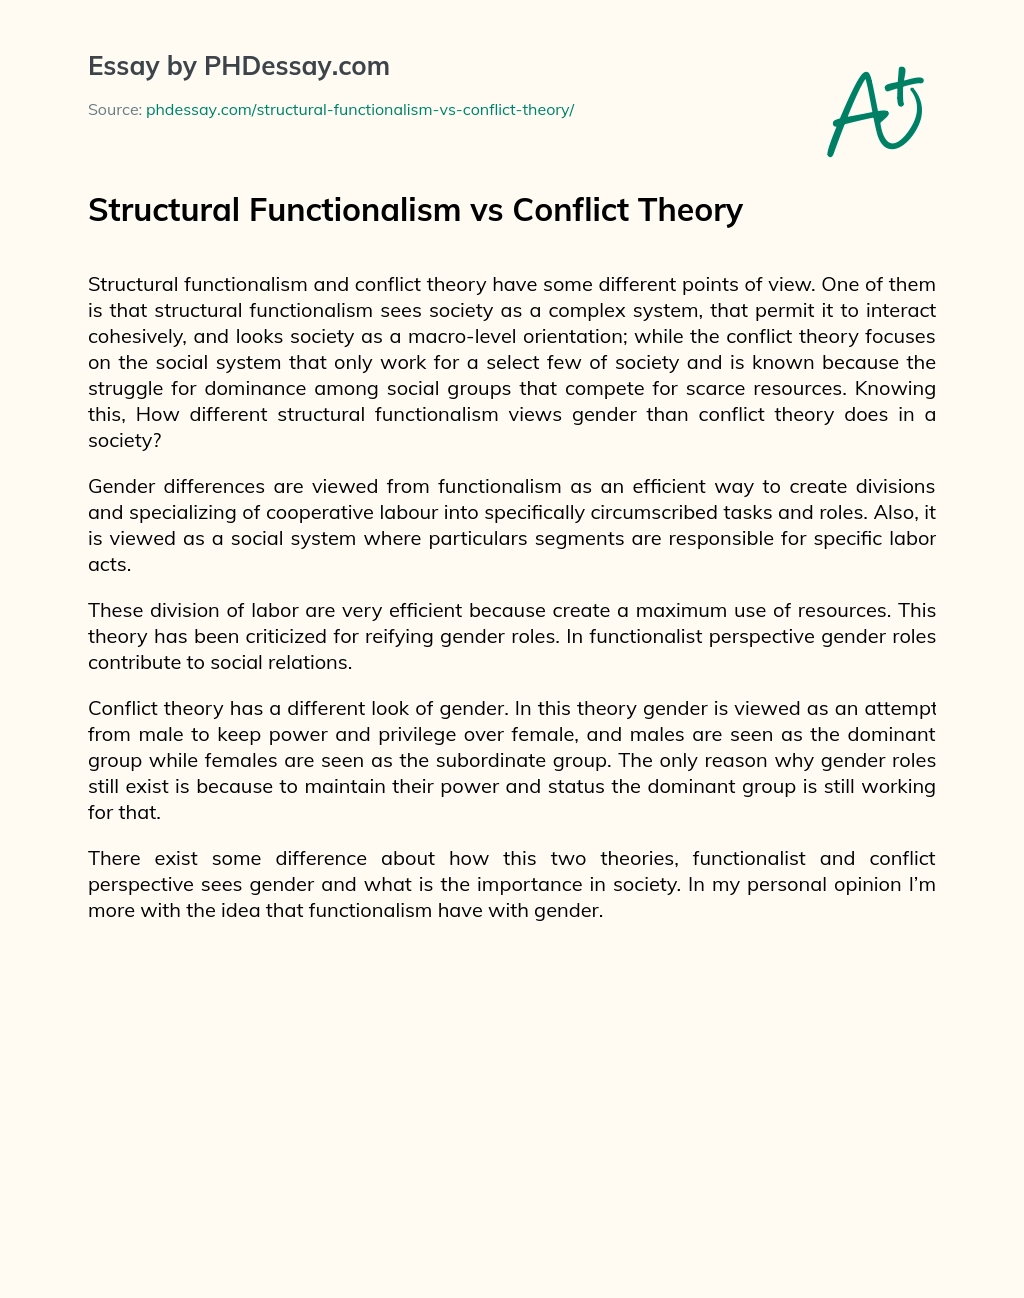 Structural Functionalism vs Conflict Theory essay